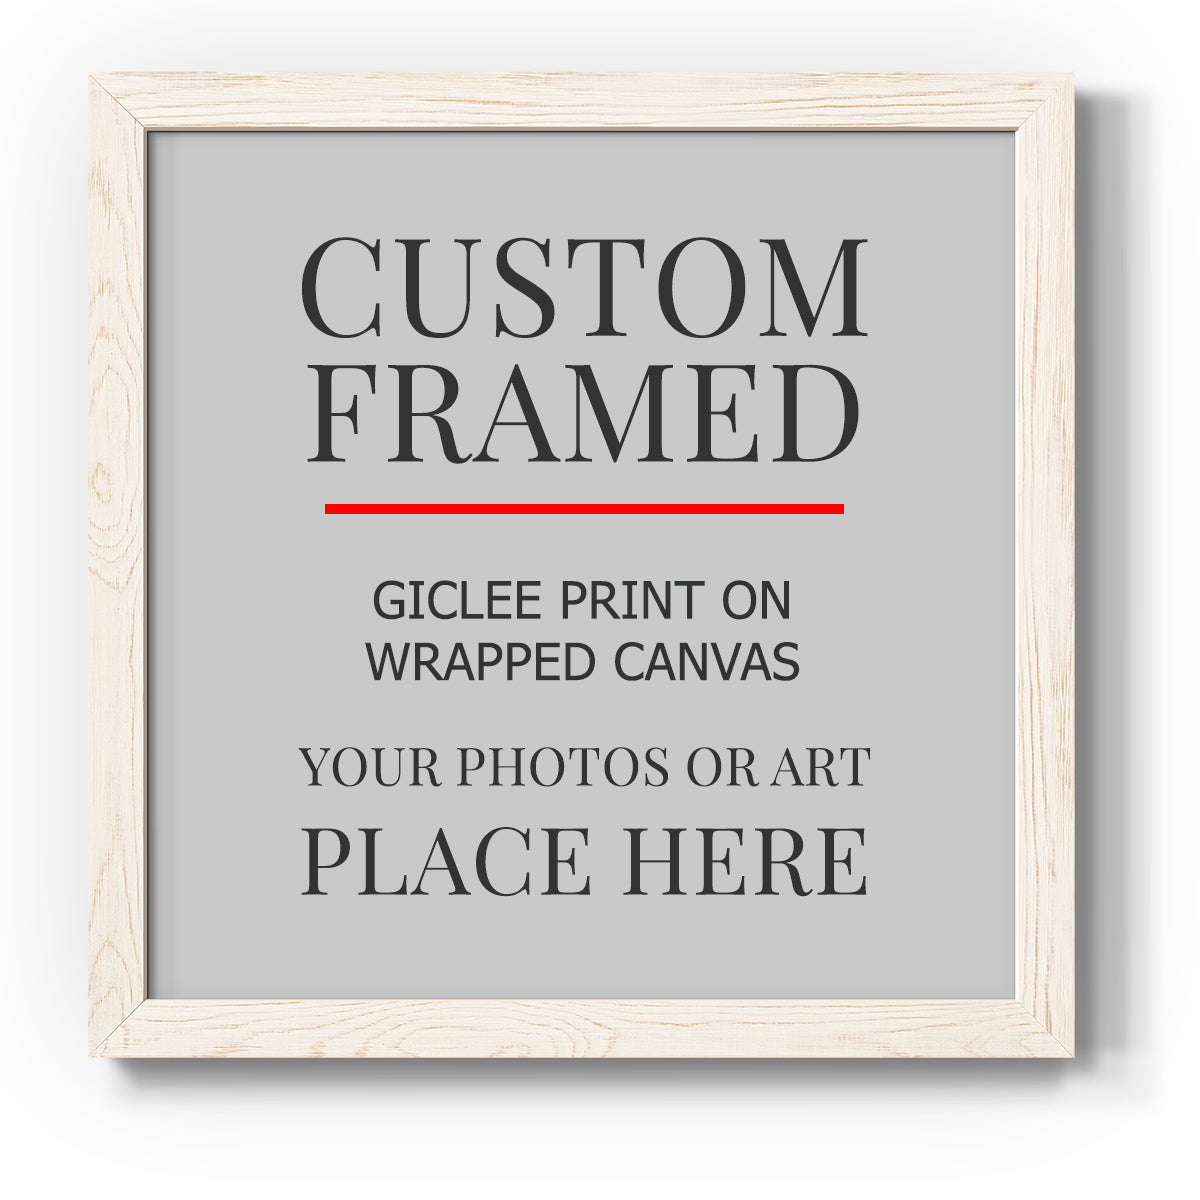 Square Custom Rustic Frames - Gallery Wrapped Canvas or Prints